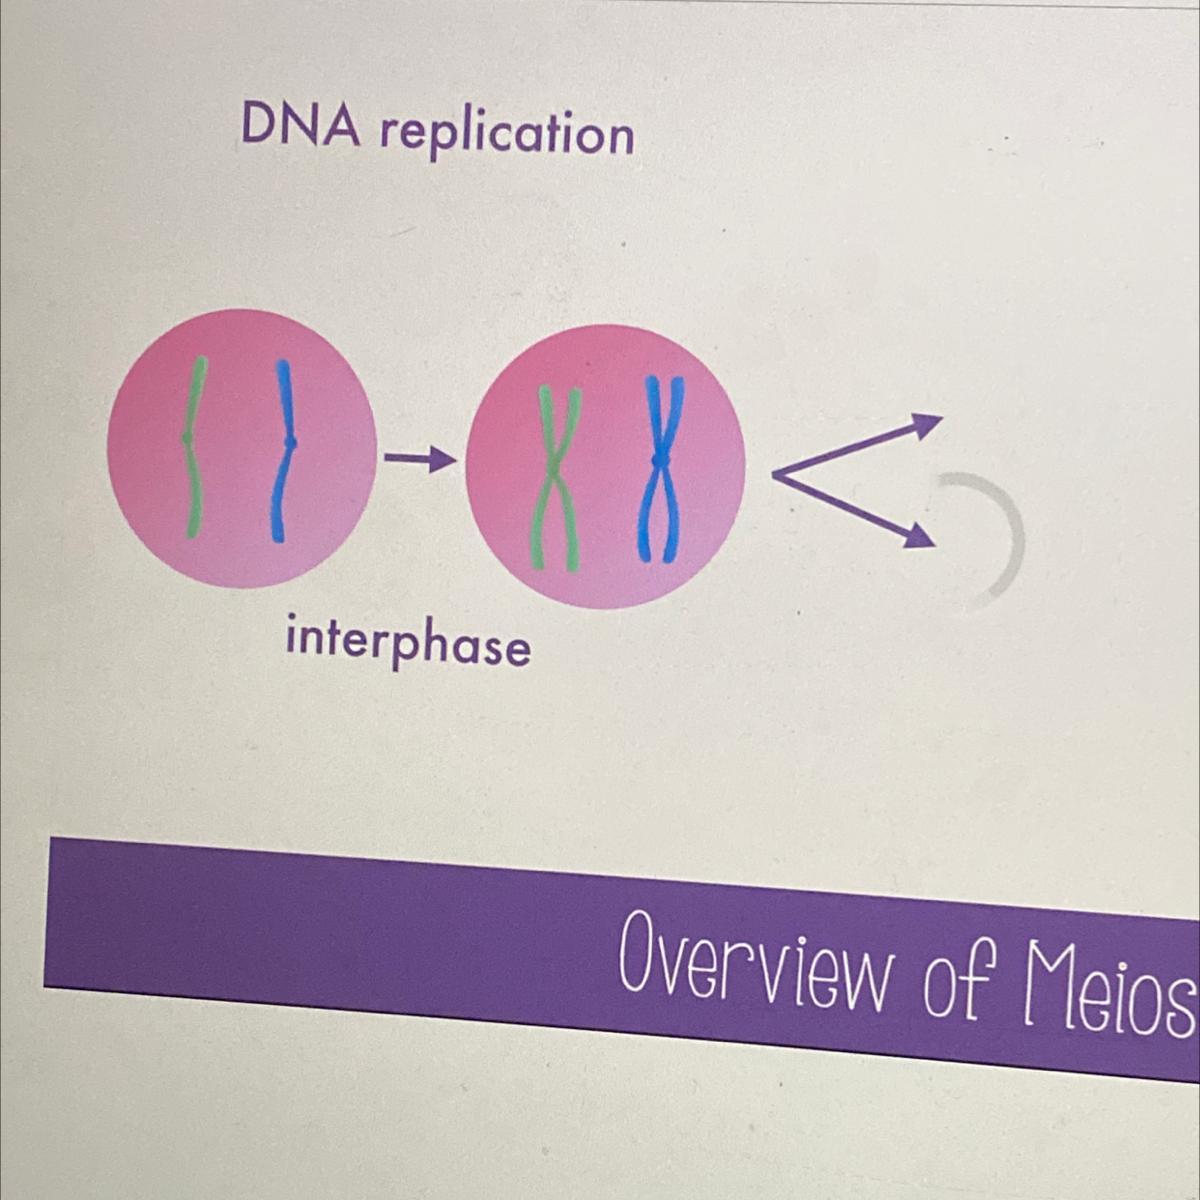 During Which Phase Does DNA Replication Occur?A. MetaphaseB. AnaphaseC. ProphaseD. Interphase